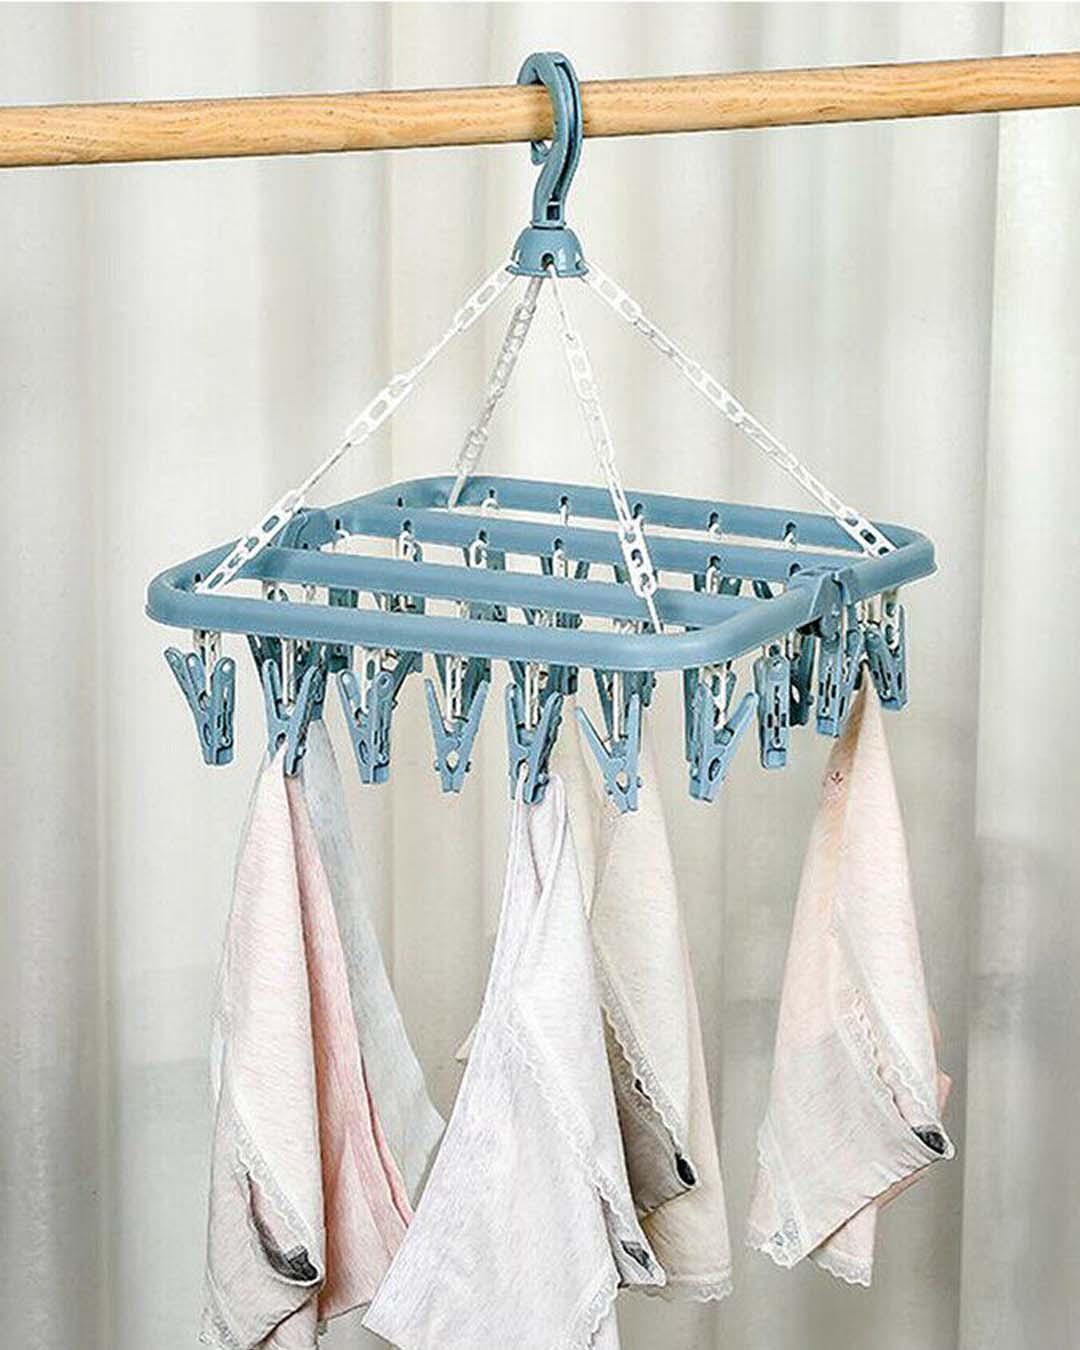 Clothes Hanger with In-Built Pegs, Blue, Plastic - MARKET 99